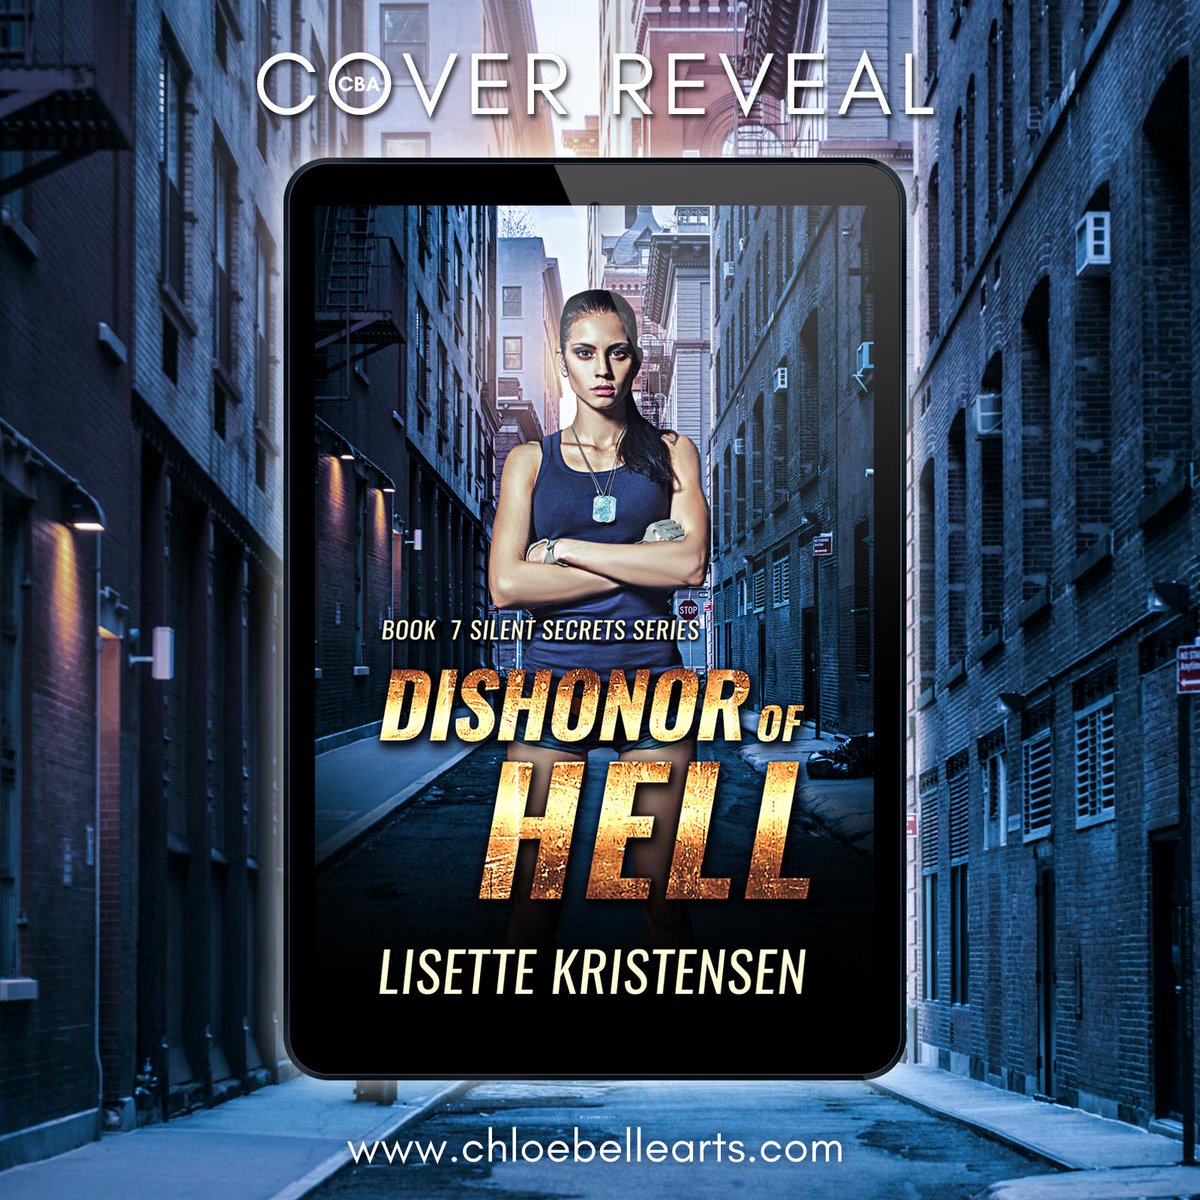 #CoverReveal 
@ev1250  
 
Dishonor of Hell, Book 7 Silent Secret Series
#Militaryfiction #fiction #BookCoverReveal #BookCoverDesign #custombookcover